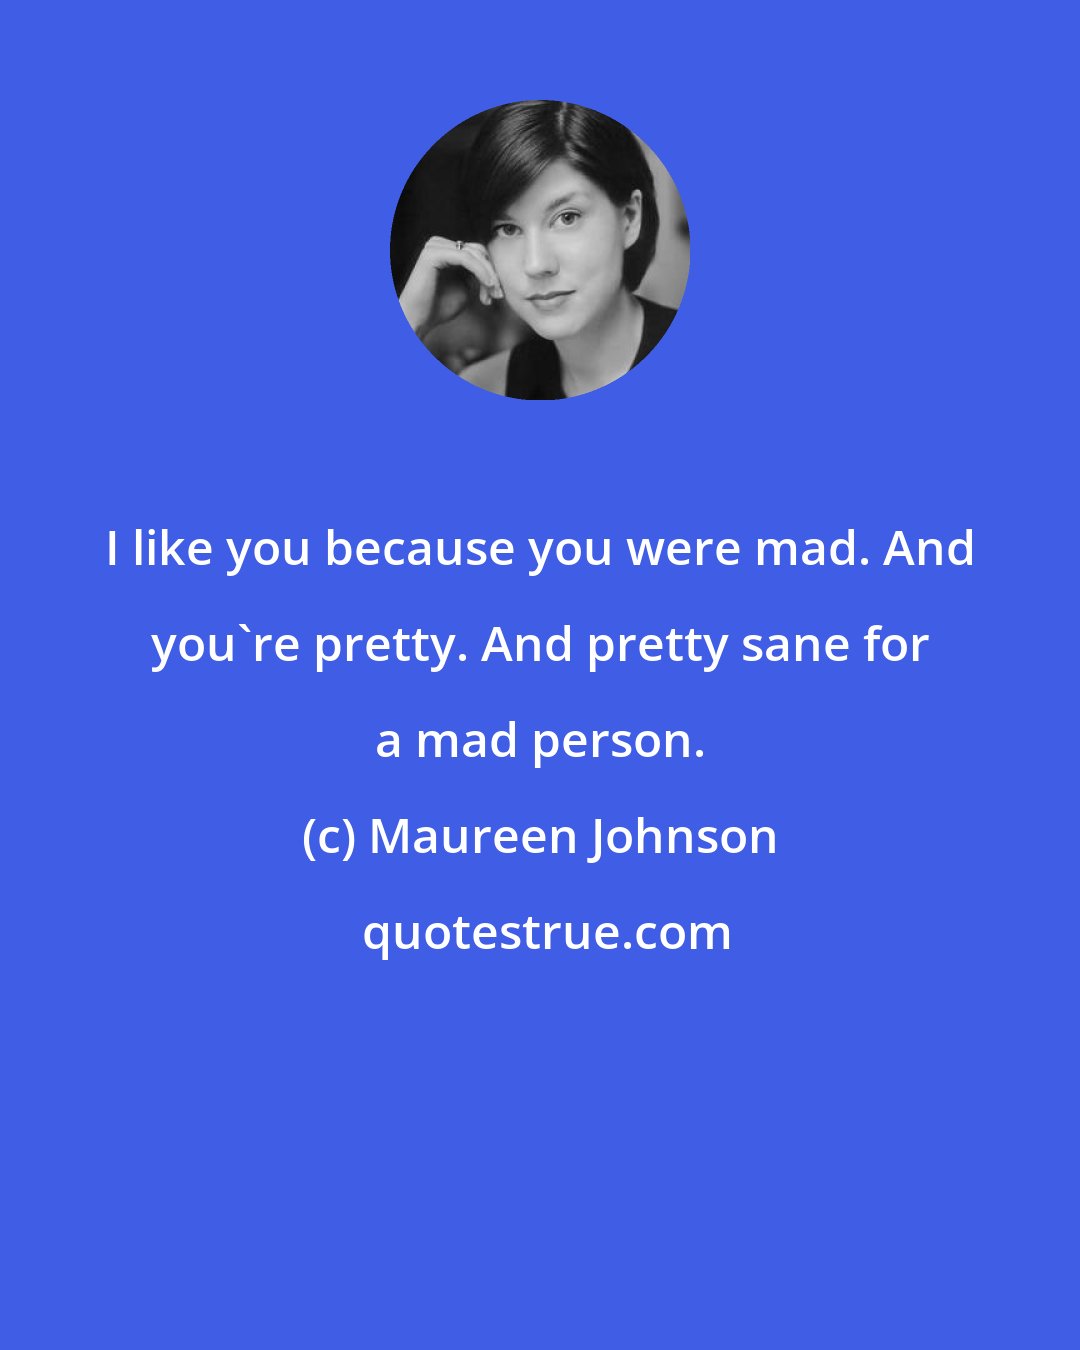 Maureen Johnson: I like you because you were mad. And you're pretty. And pretty sane for a mad person.